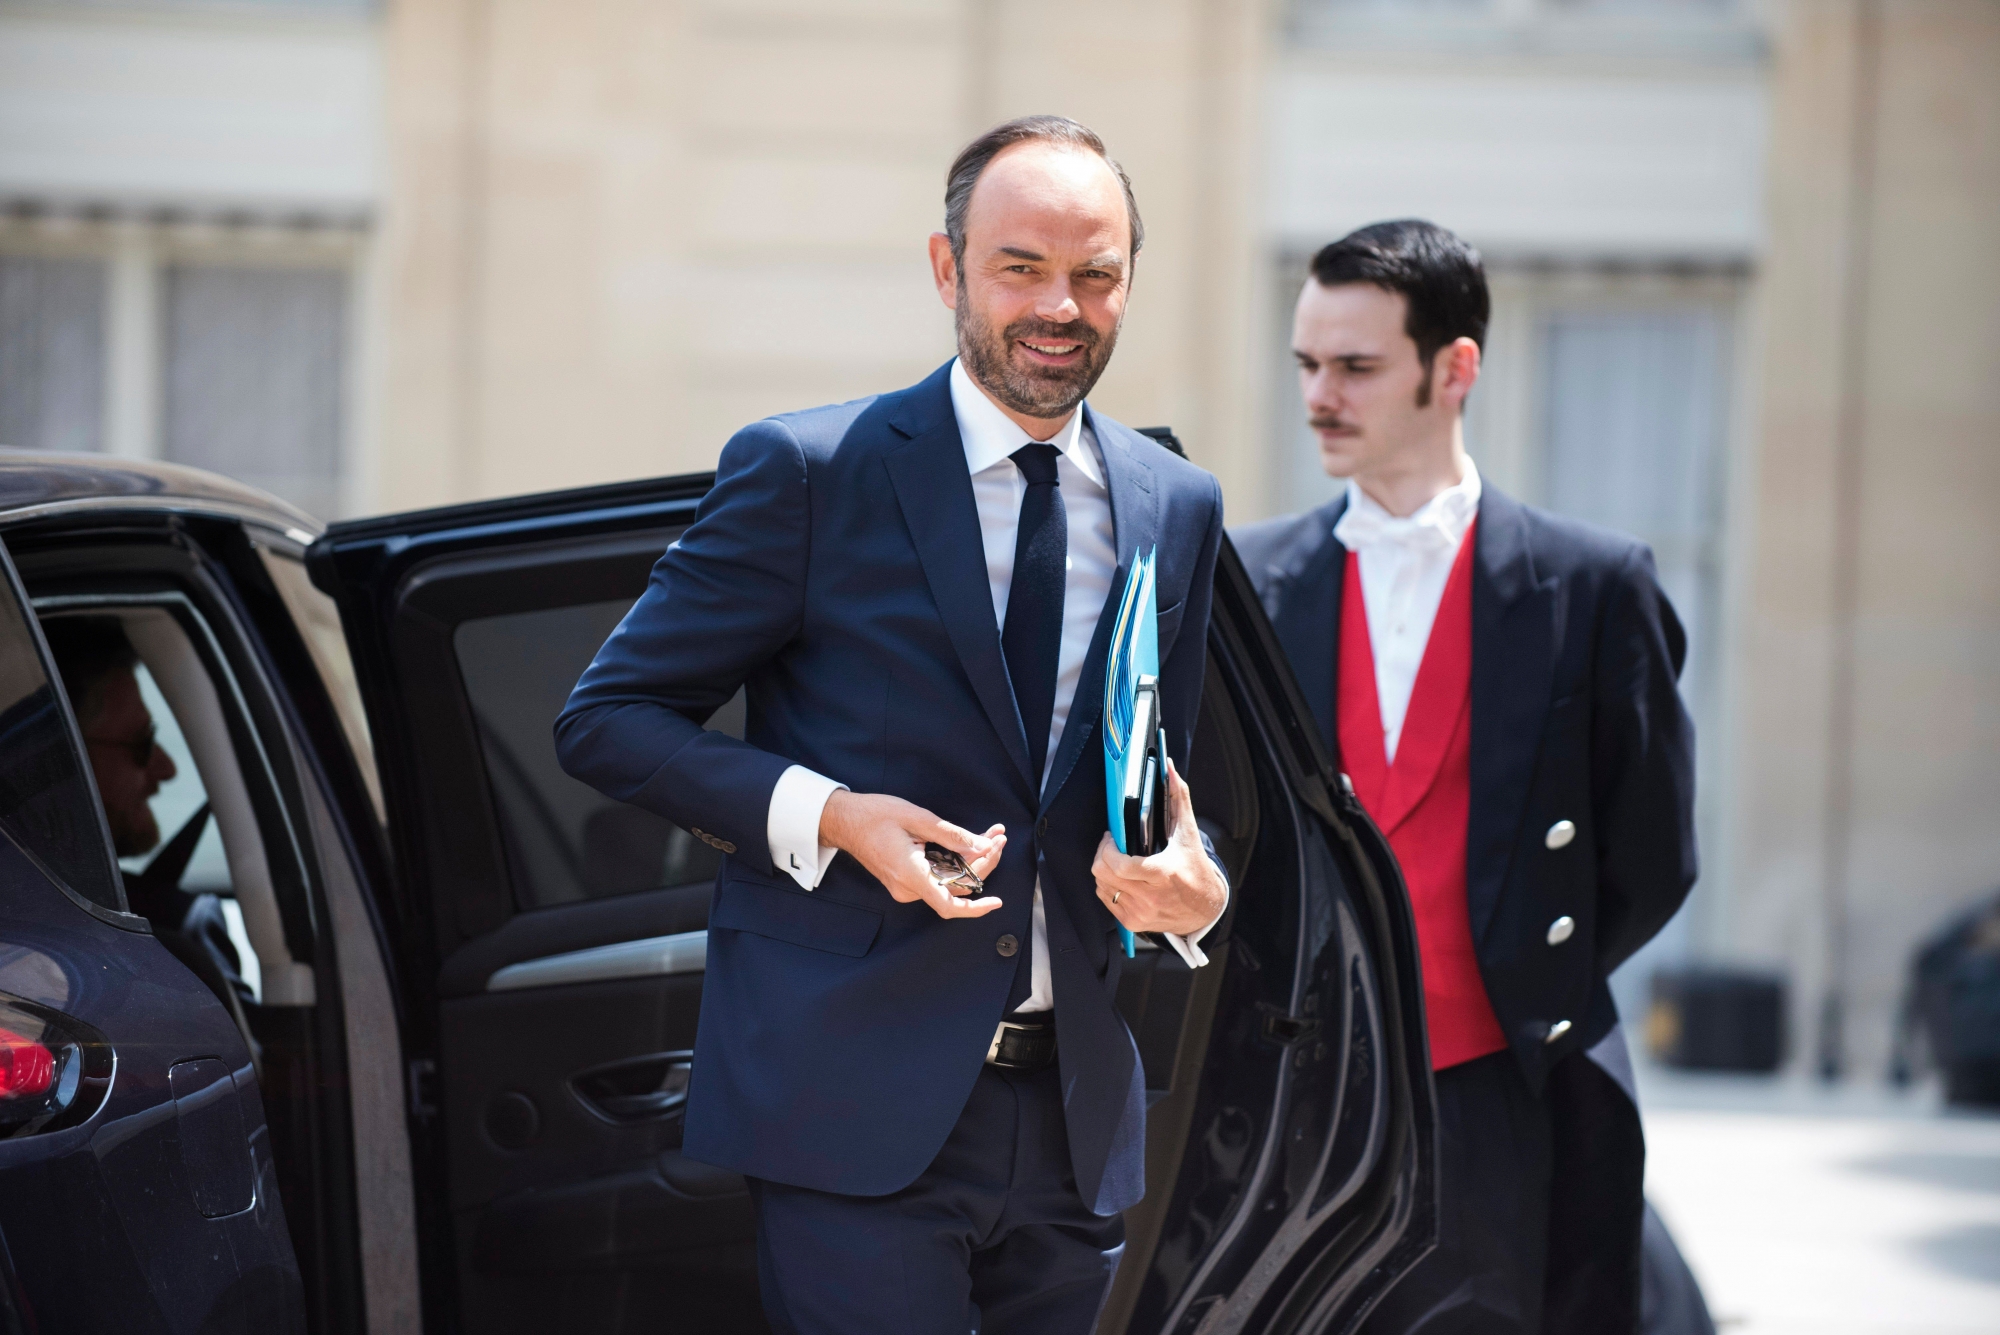 epa06038840 French Prime Minister Edouard Philippe arrives for a lunch with French President Macron at the Elysee Palace in Paris, France, 20 June 2017. Edouard Philippe was reappointed as Prime Minister on 19 June after Macron's party 'Le Republique En Marche' (The Republic on the Move, LREM) won an absolute majority in French parliament.  EPA/JULIEN DE ROSA FRANCE GOVERNEMENT MEETING